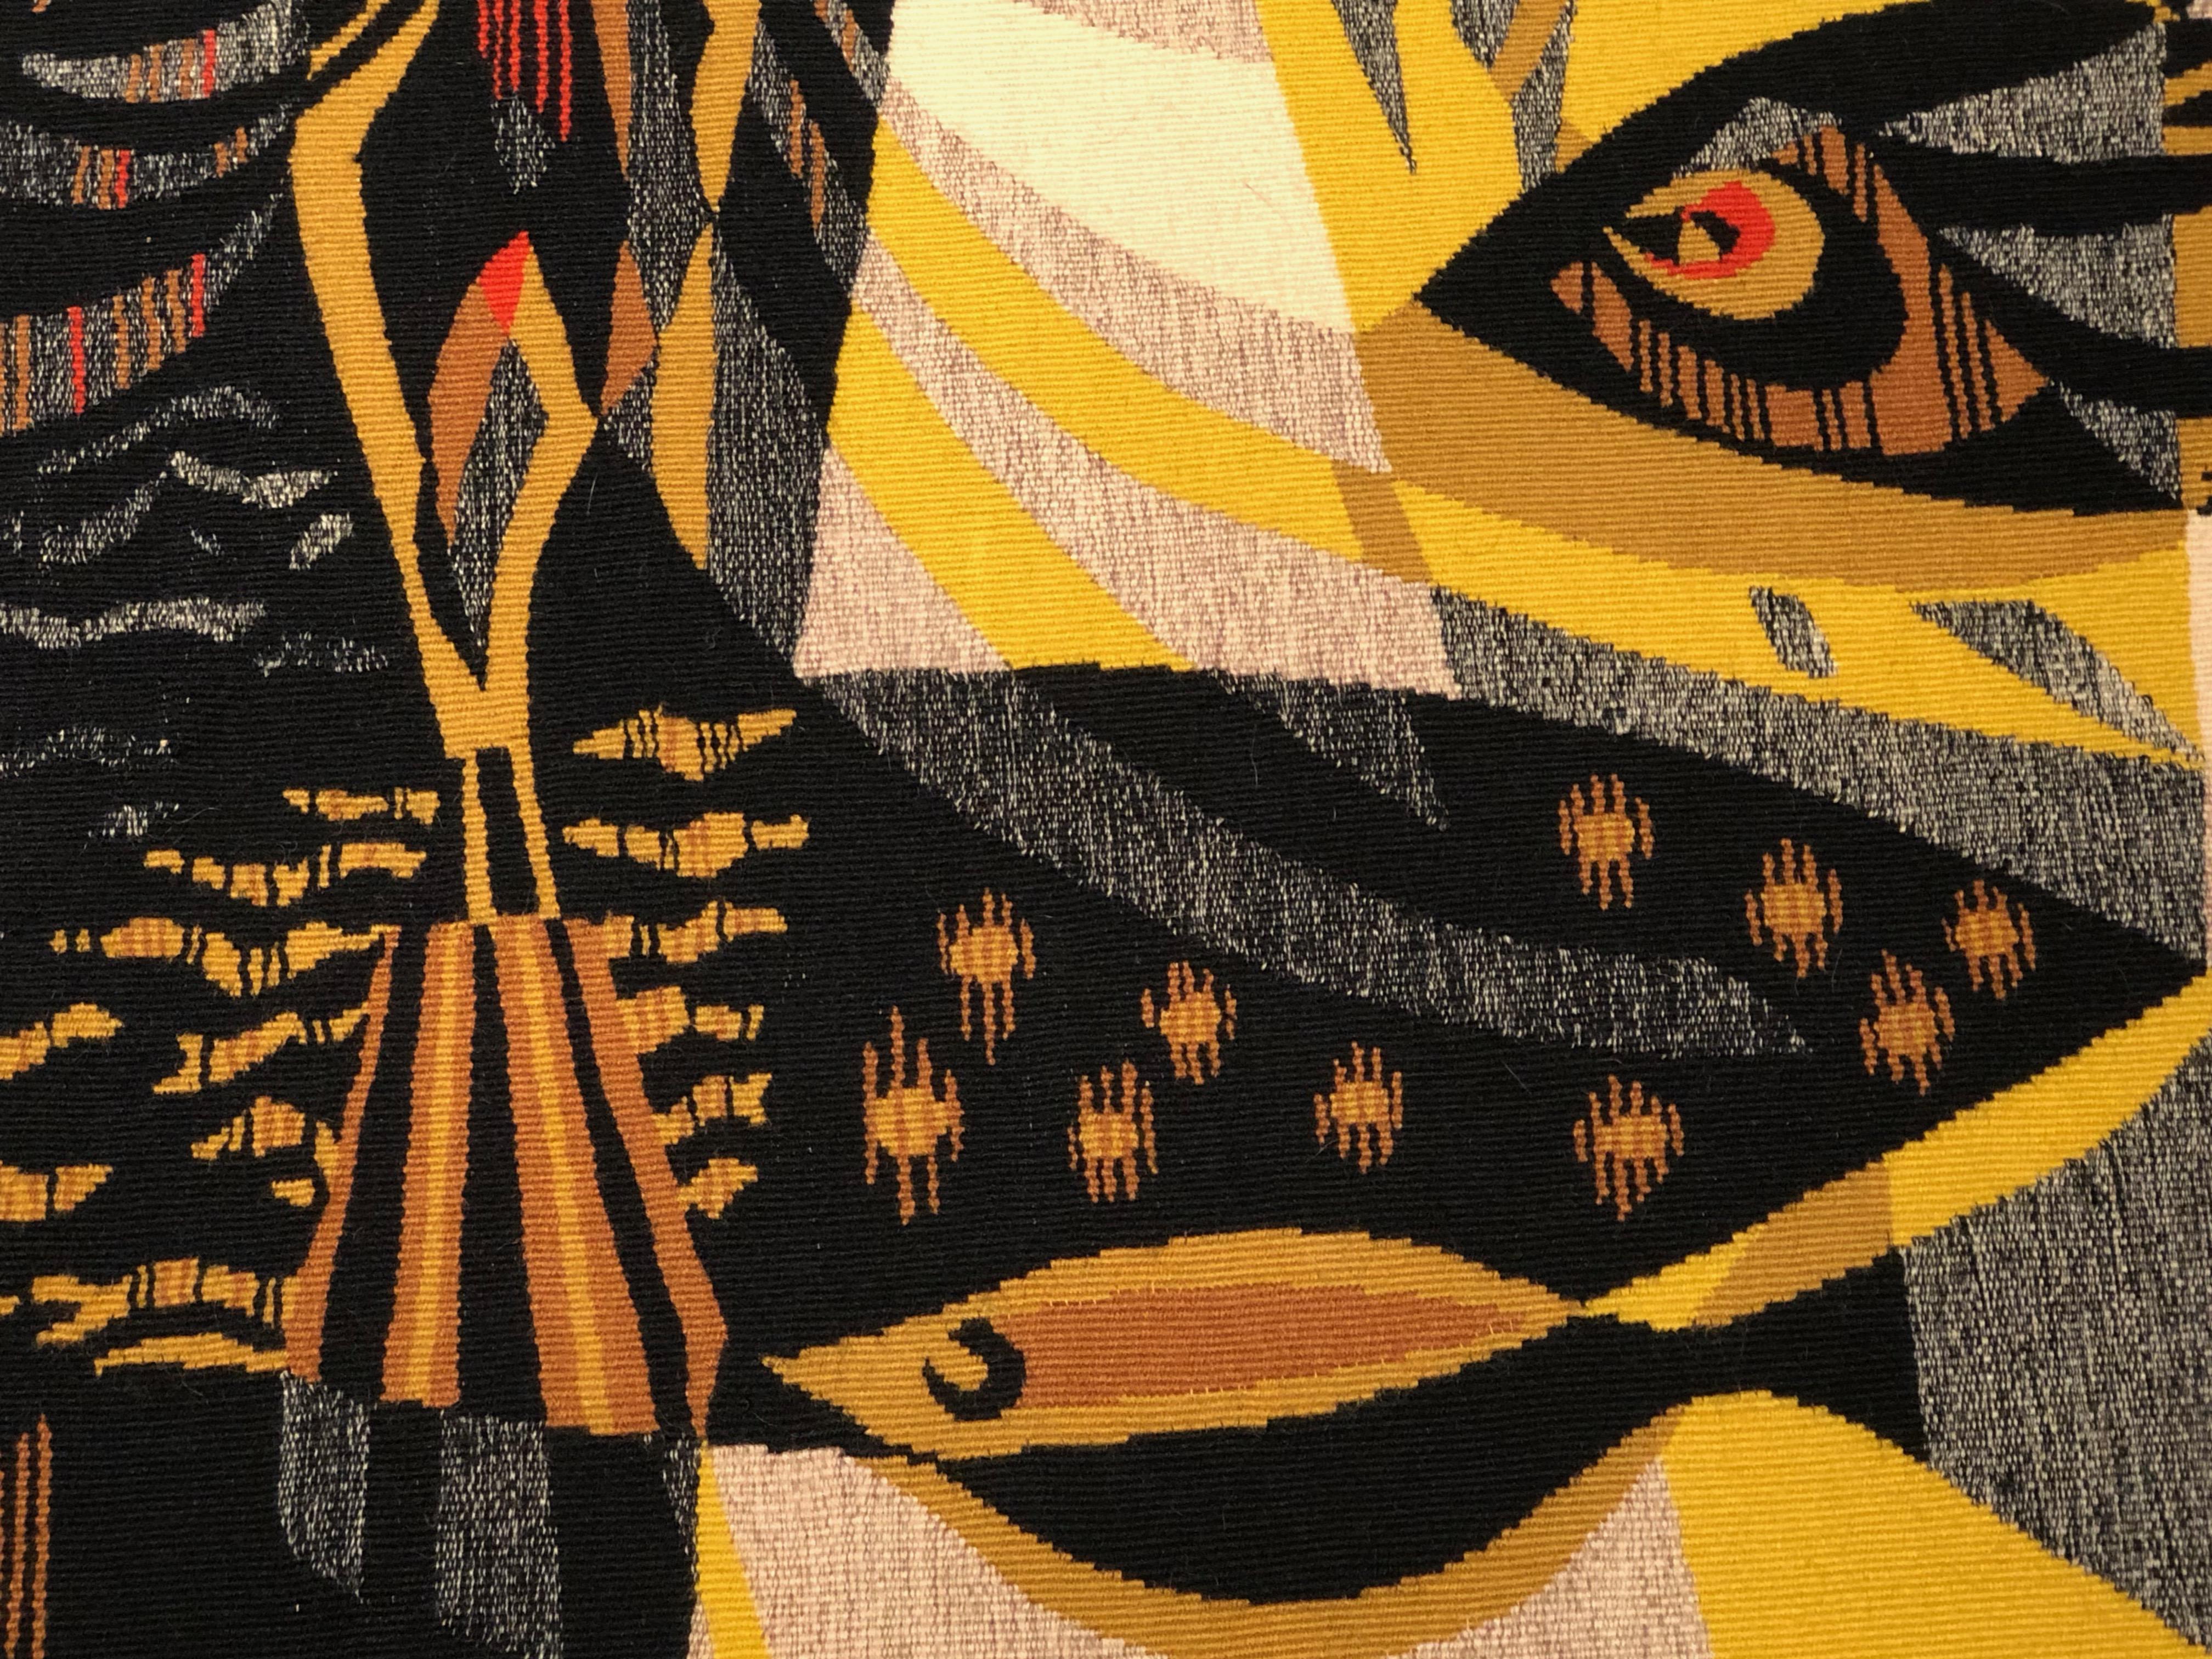 Mid-century tapestry designed by Maurice Andre (1914-1985) and woven at Atelier Pinton Freres in Aubusson, France. Hand-woven in wool, it dates to the 1960s and titled 